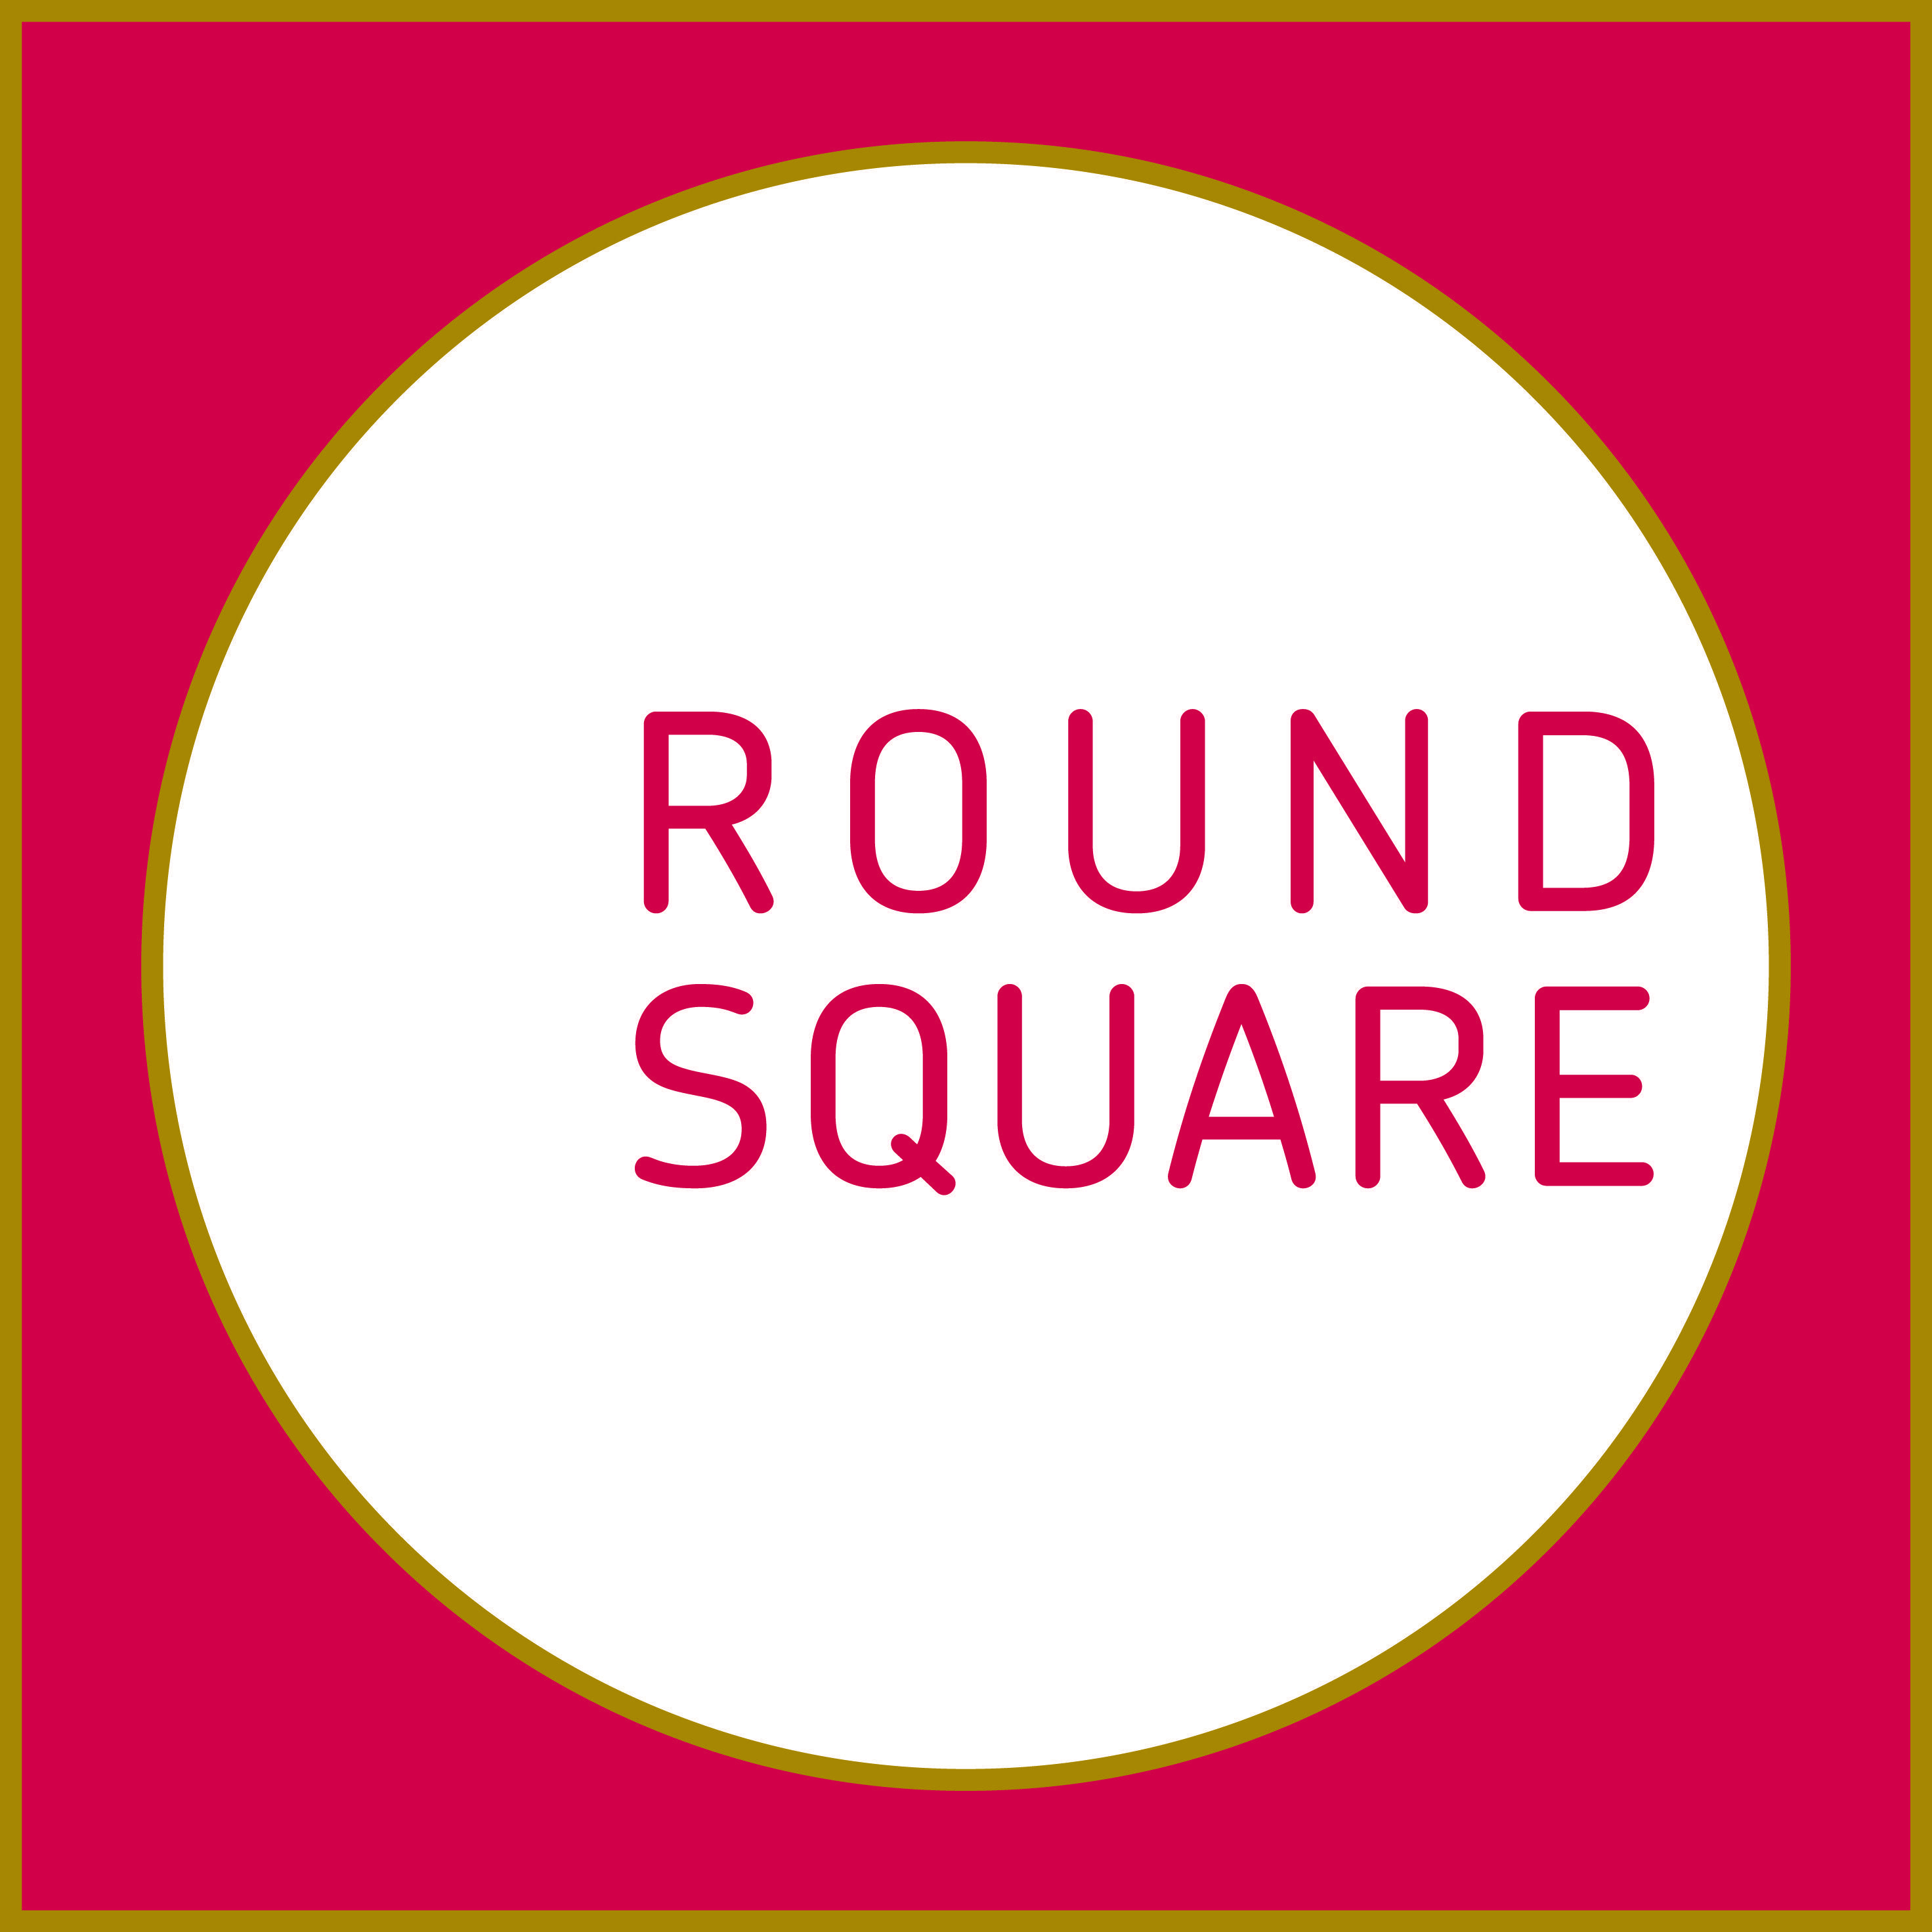 Round Square Logo - File:New logo Round Square with Gold.jpg - Wikimedia Commons